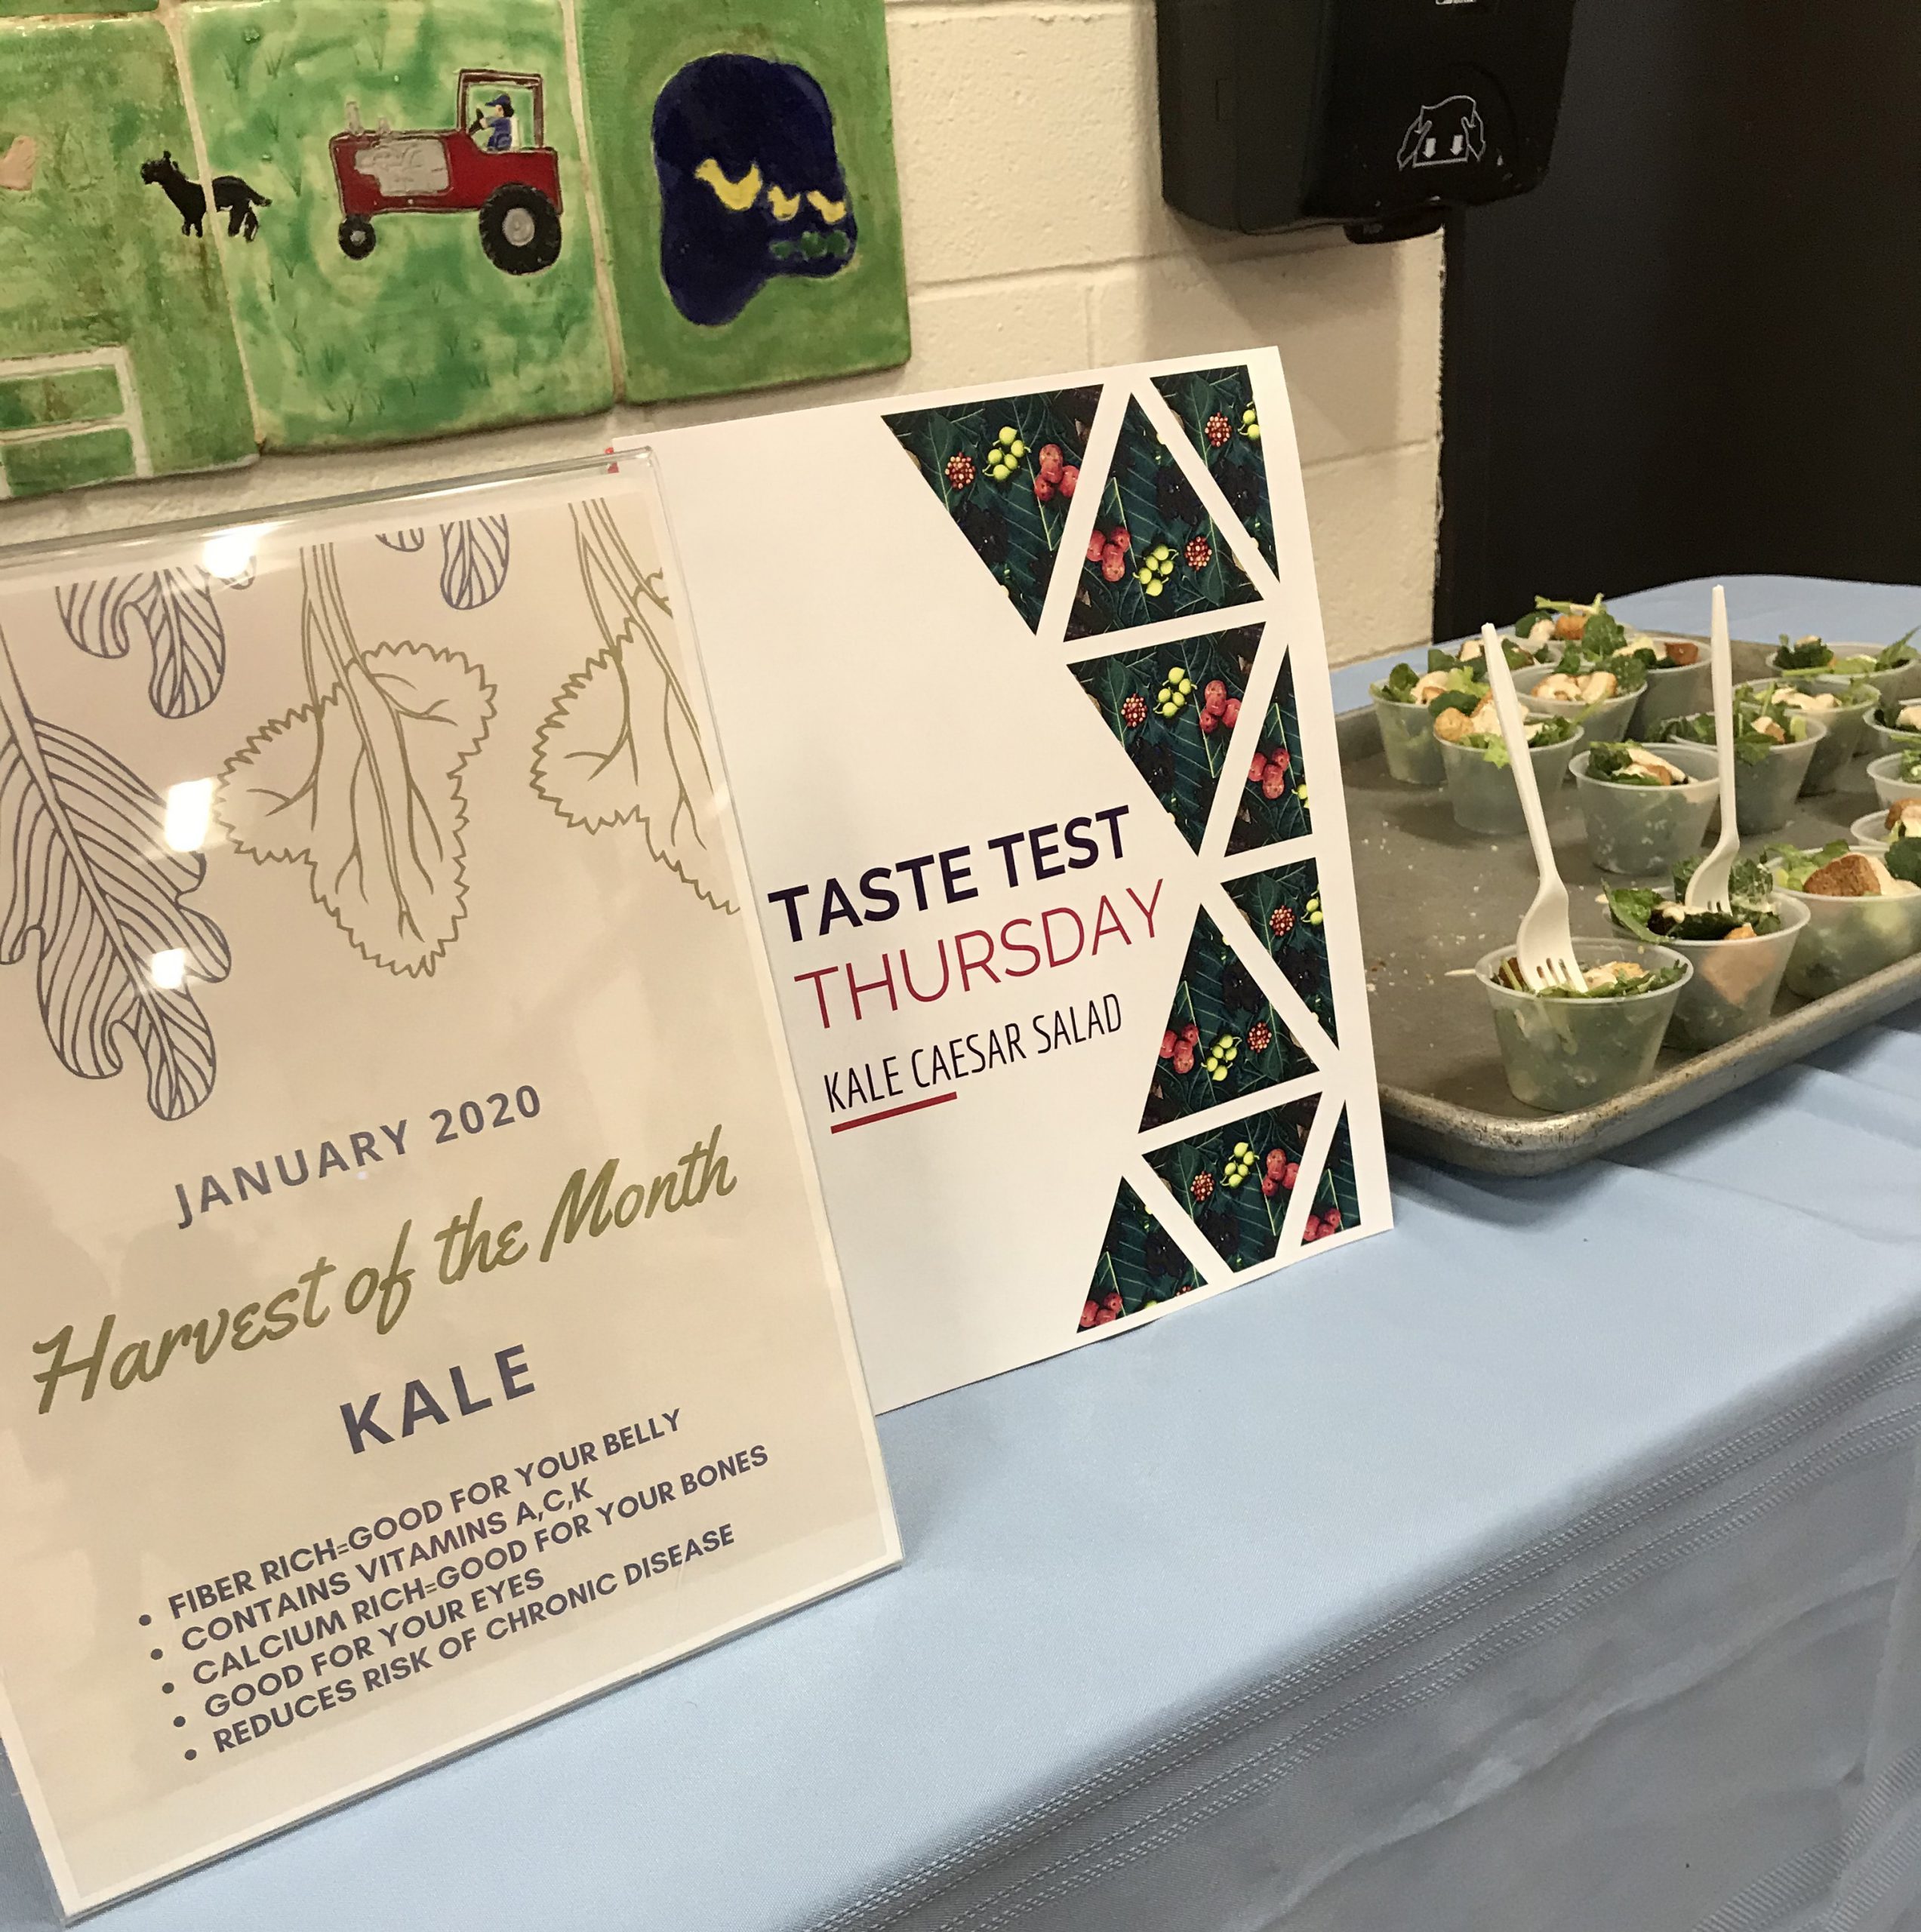 books about kale on a display table